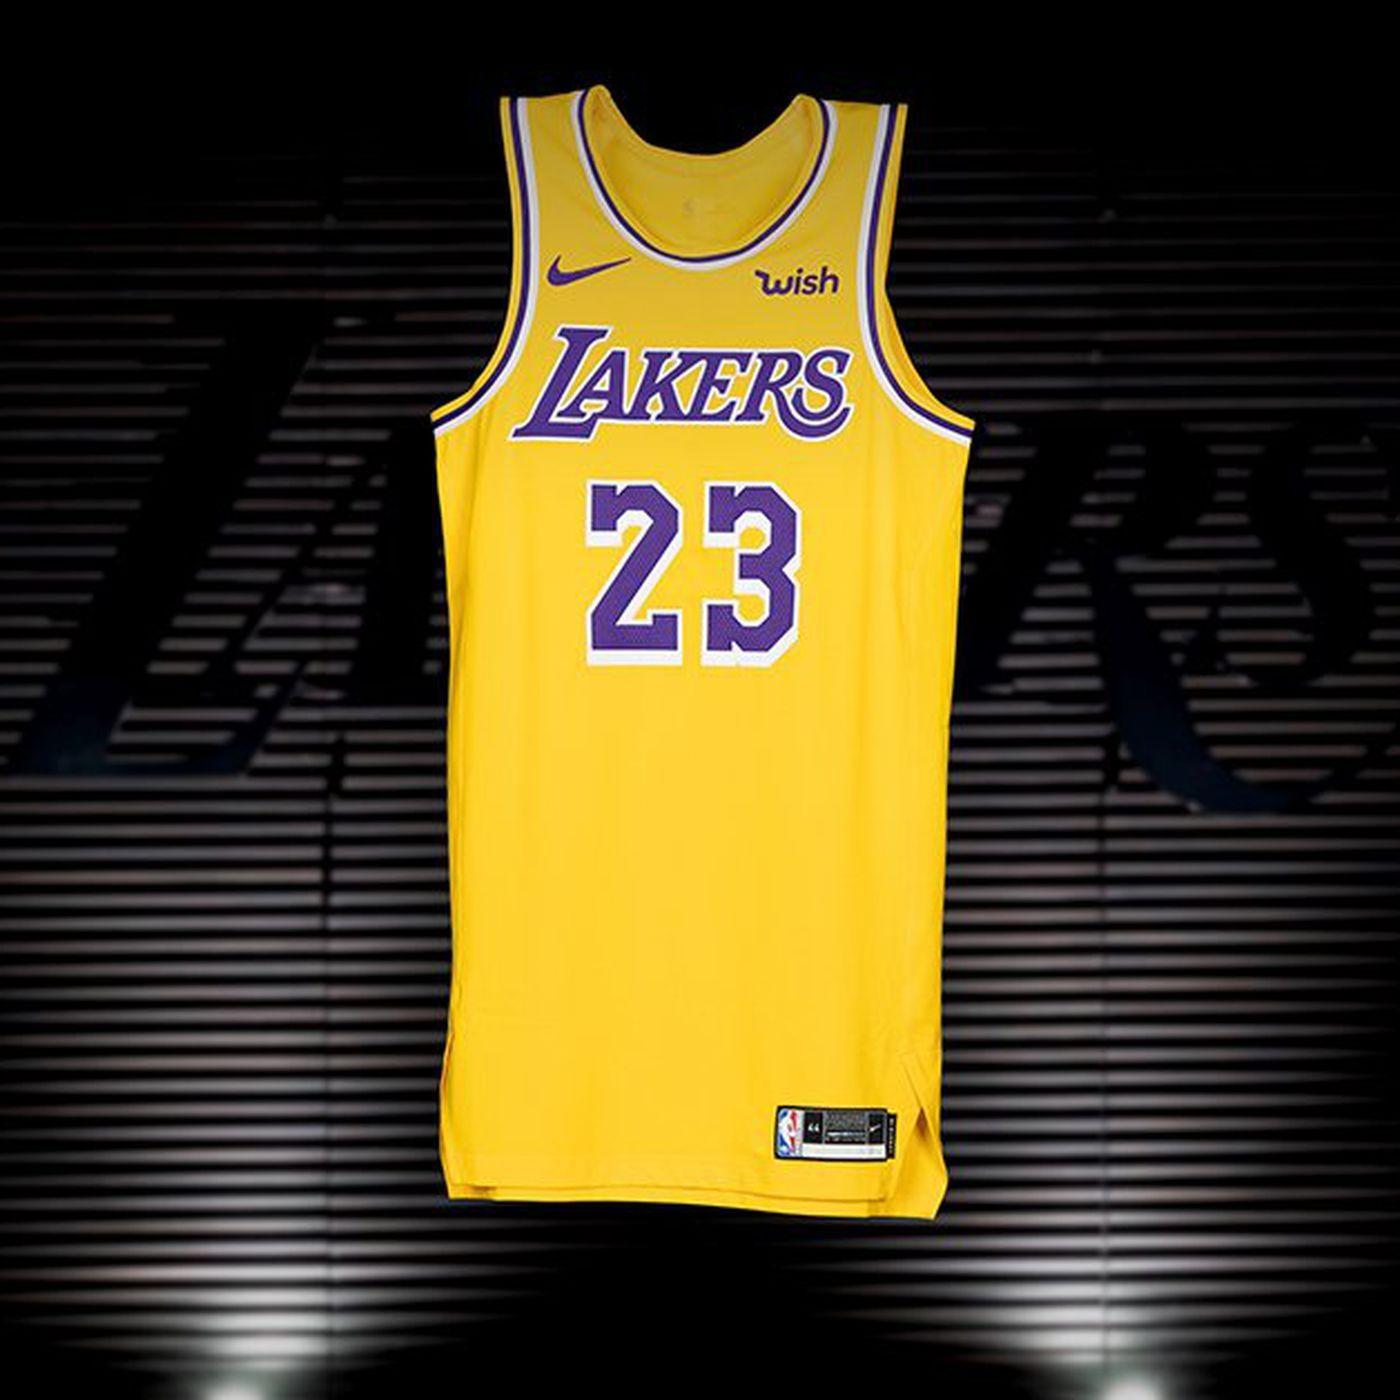 Wish On Lakers Jersey Logo - The Lakers are going back to their Showtime jerseys and they're so